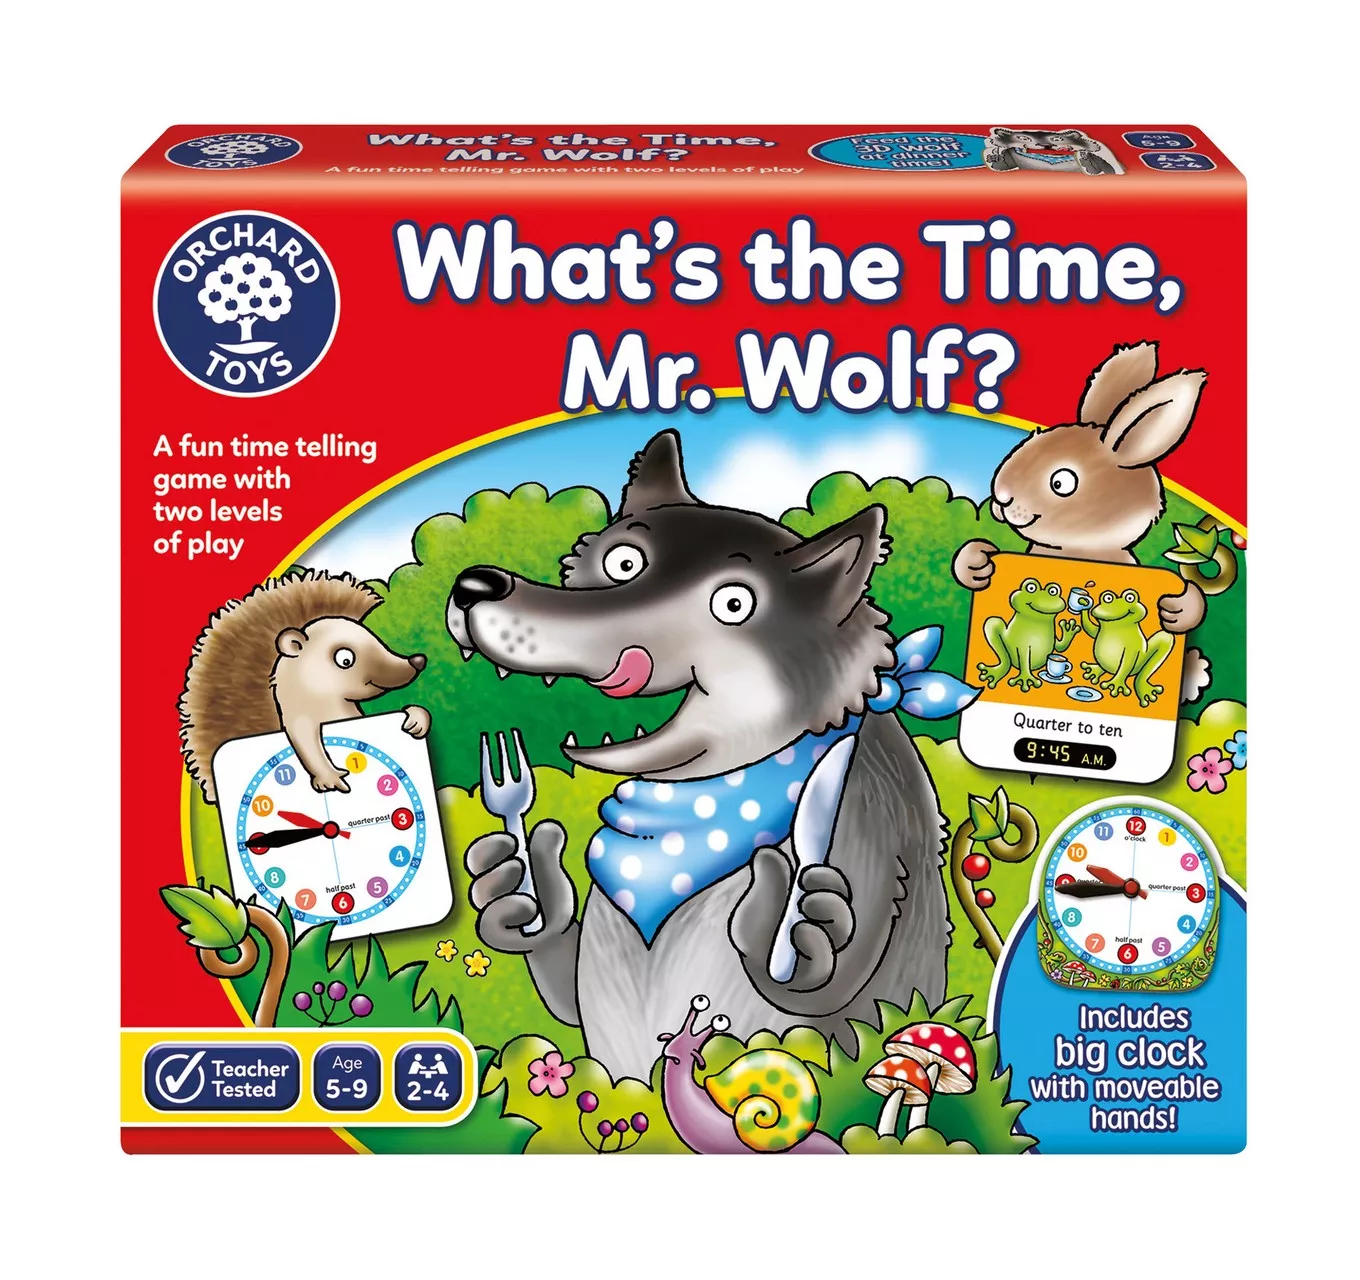 Whats The Time Mr Wolf?